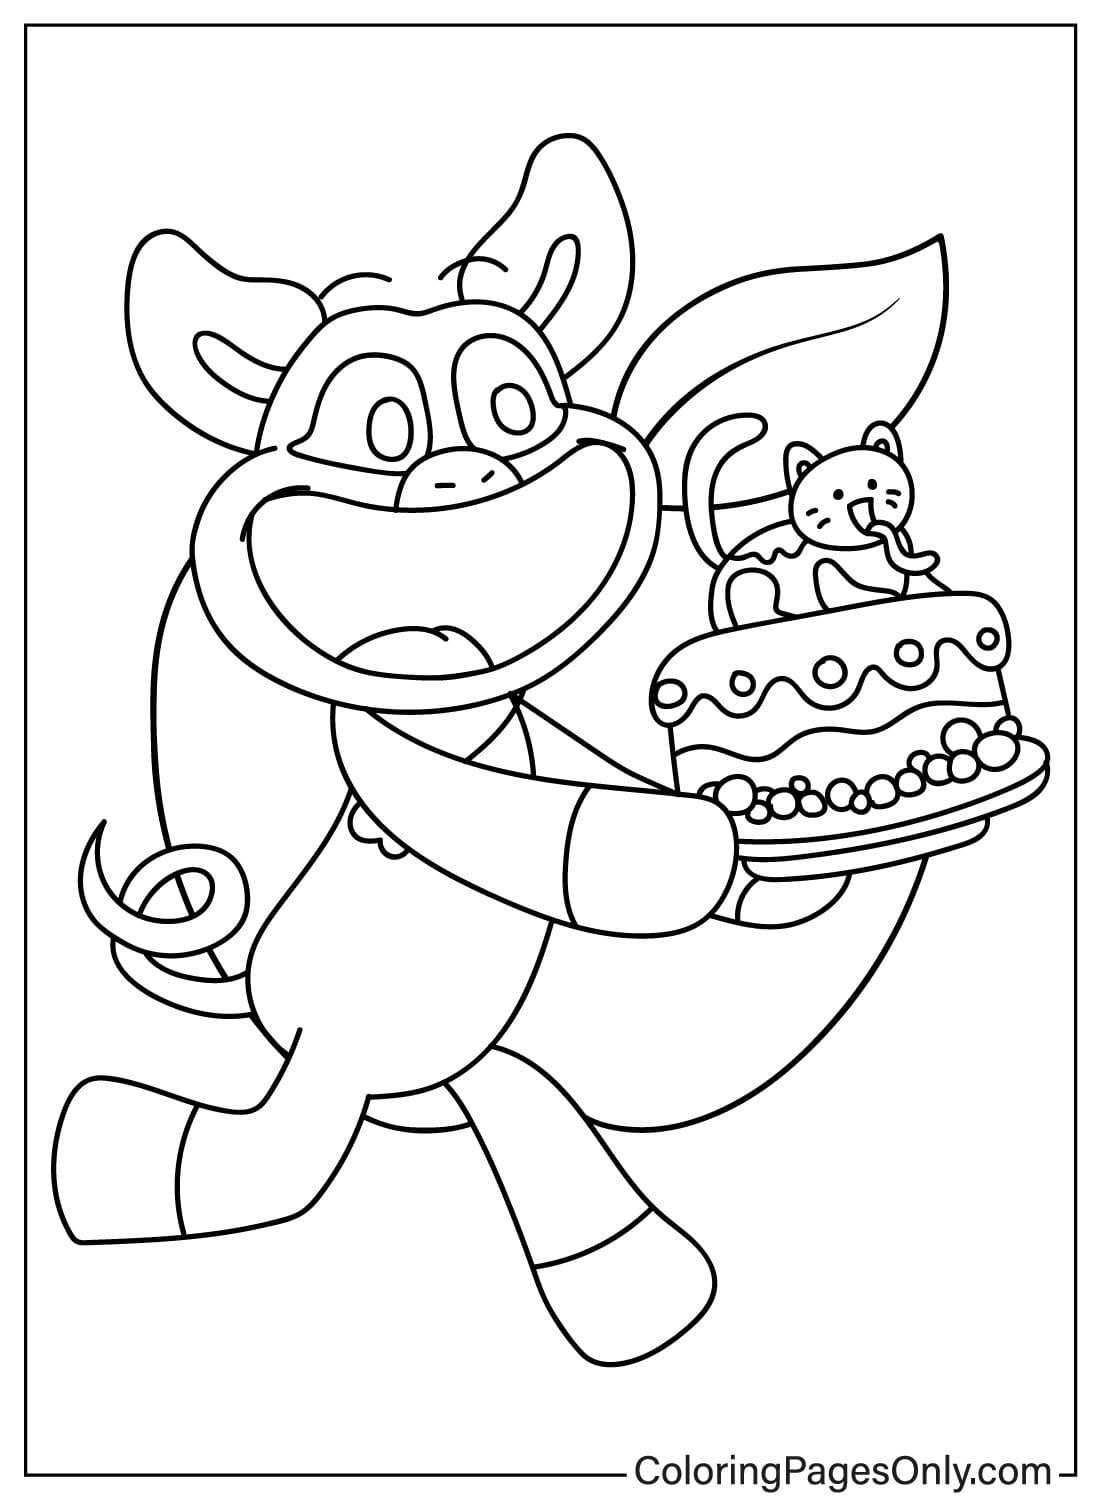 Free PickyPiggy Coloring Page from PickyPiggy